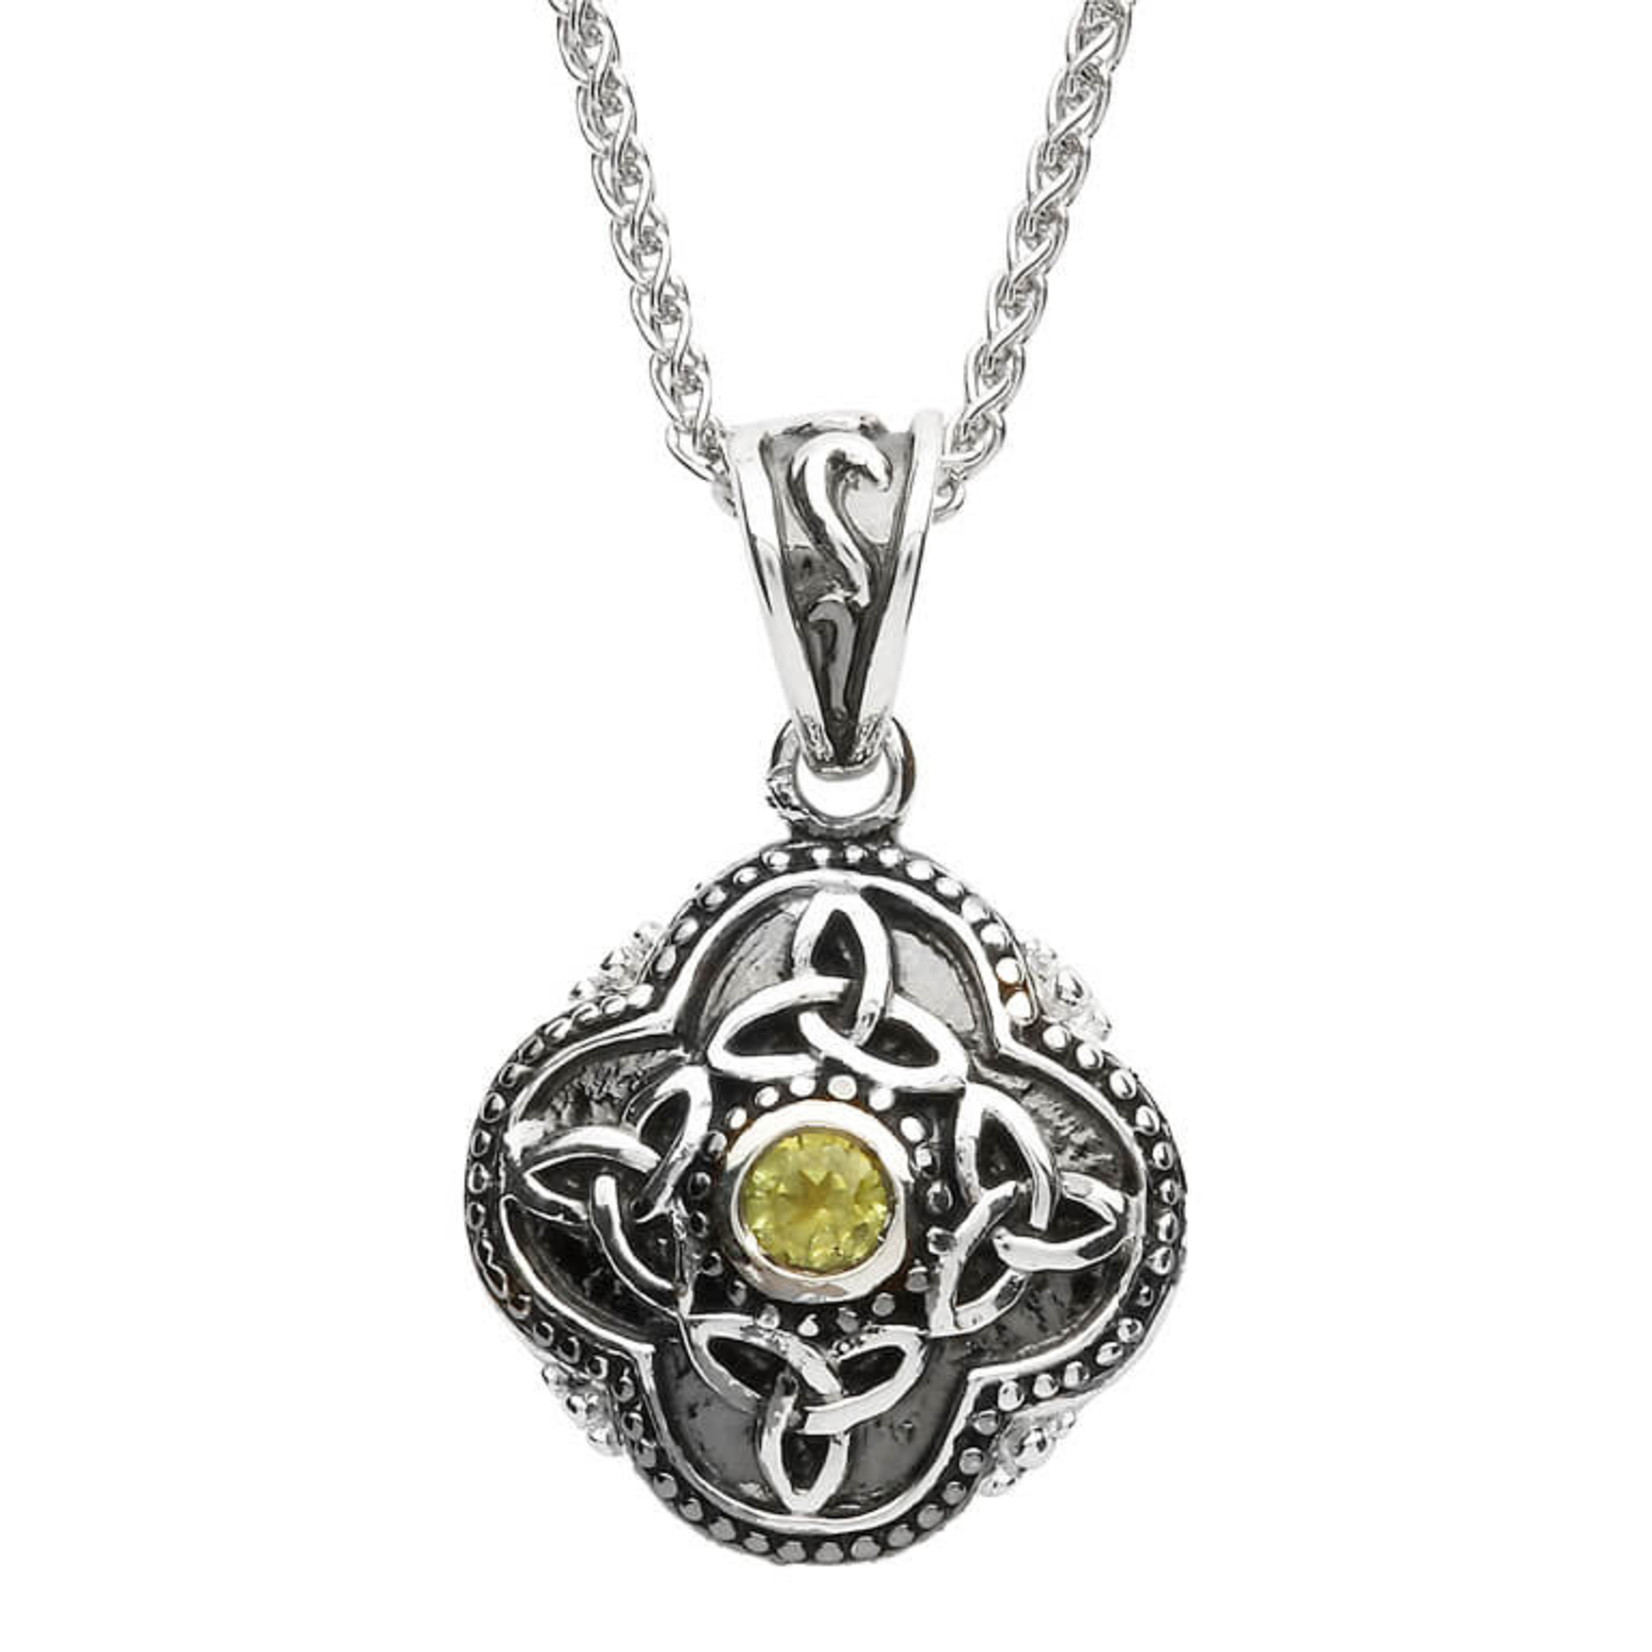 Shanore Celtic Tribal Trinity Necklace with Peridot